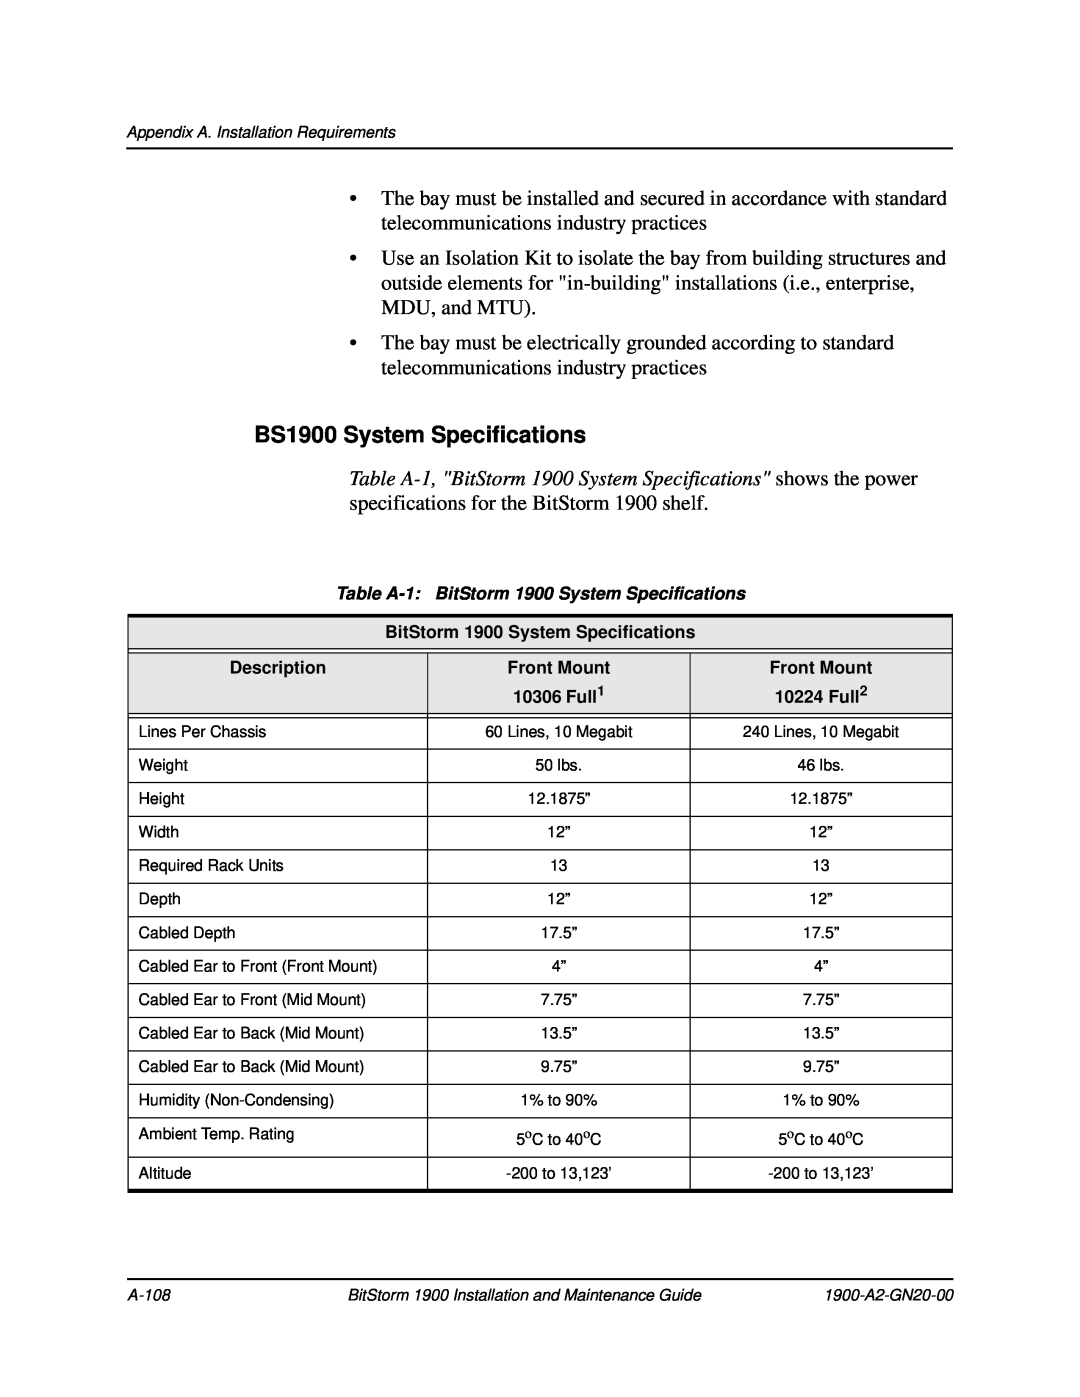 Paradyne manual BS1900 System Specifications, Table A-1 BitStorm 1900 System Specifications 